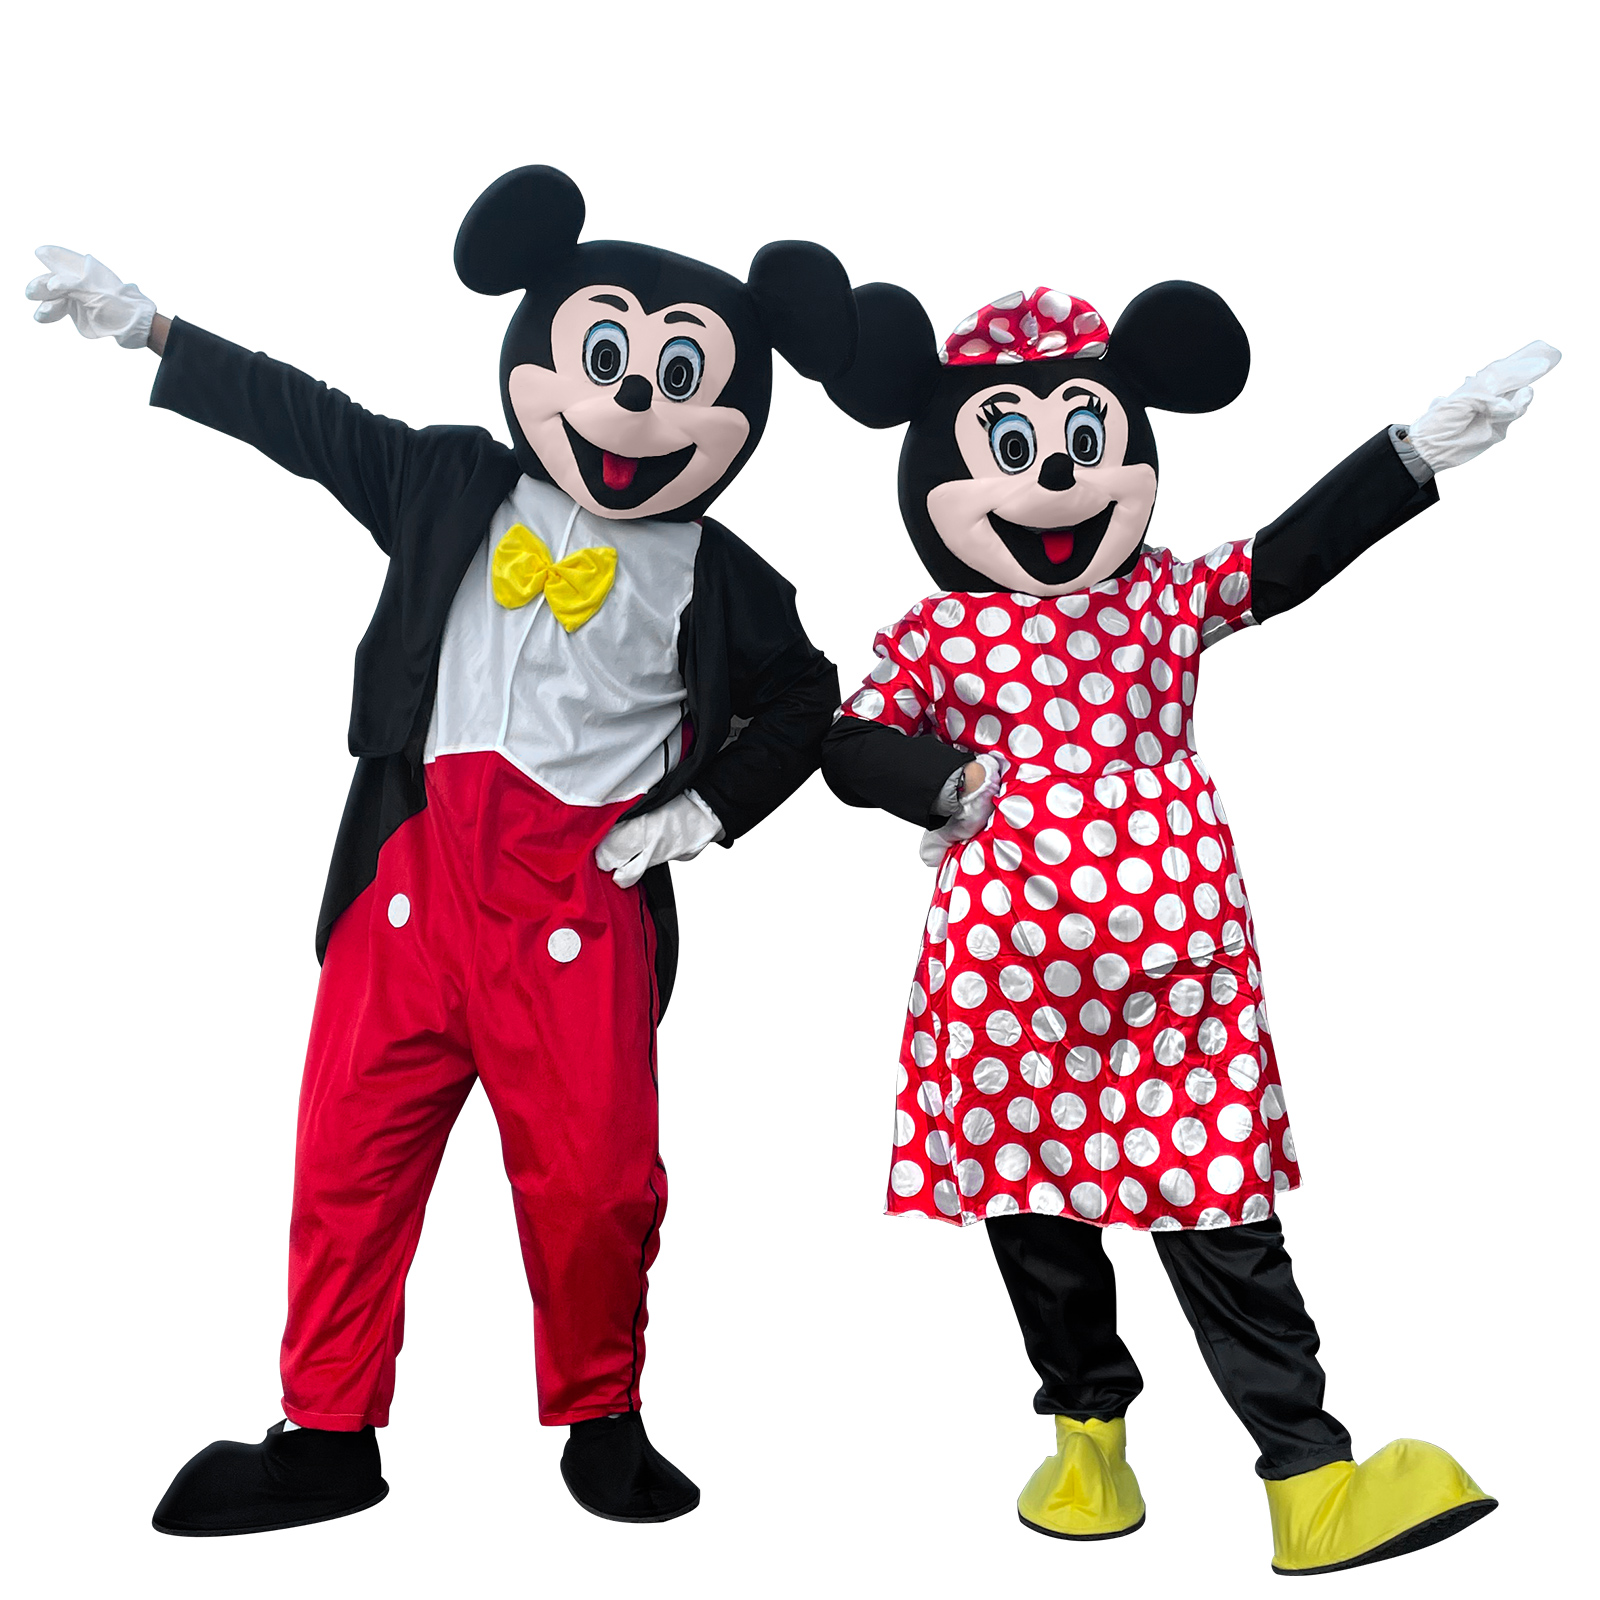 Classic Mascot Costume Compatible with Mickey and Minnie Mouse Adult Size for Men & Women Birthday Party - image 1 of 5